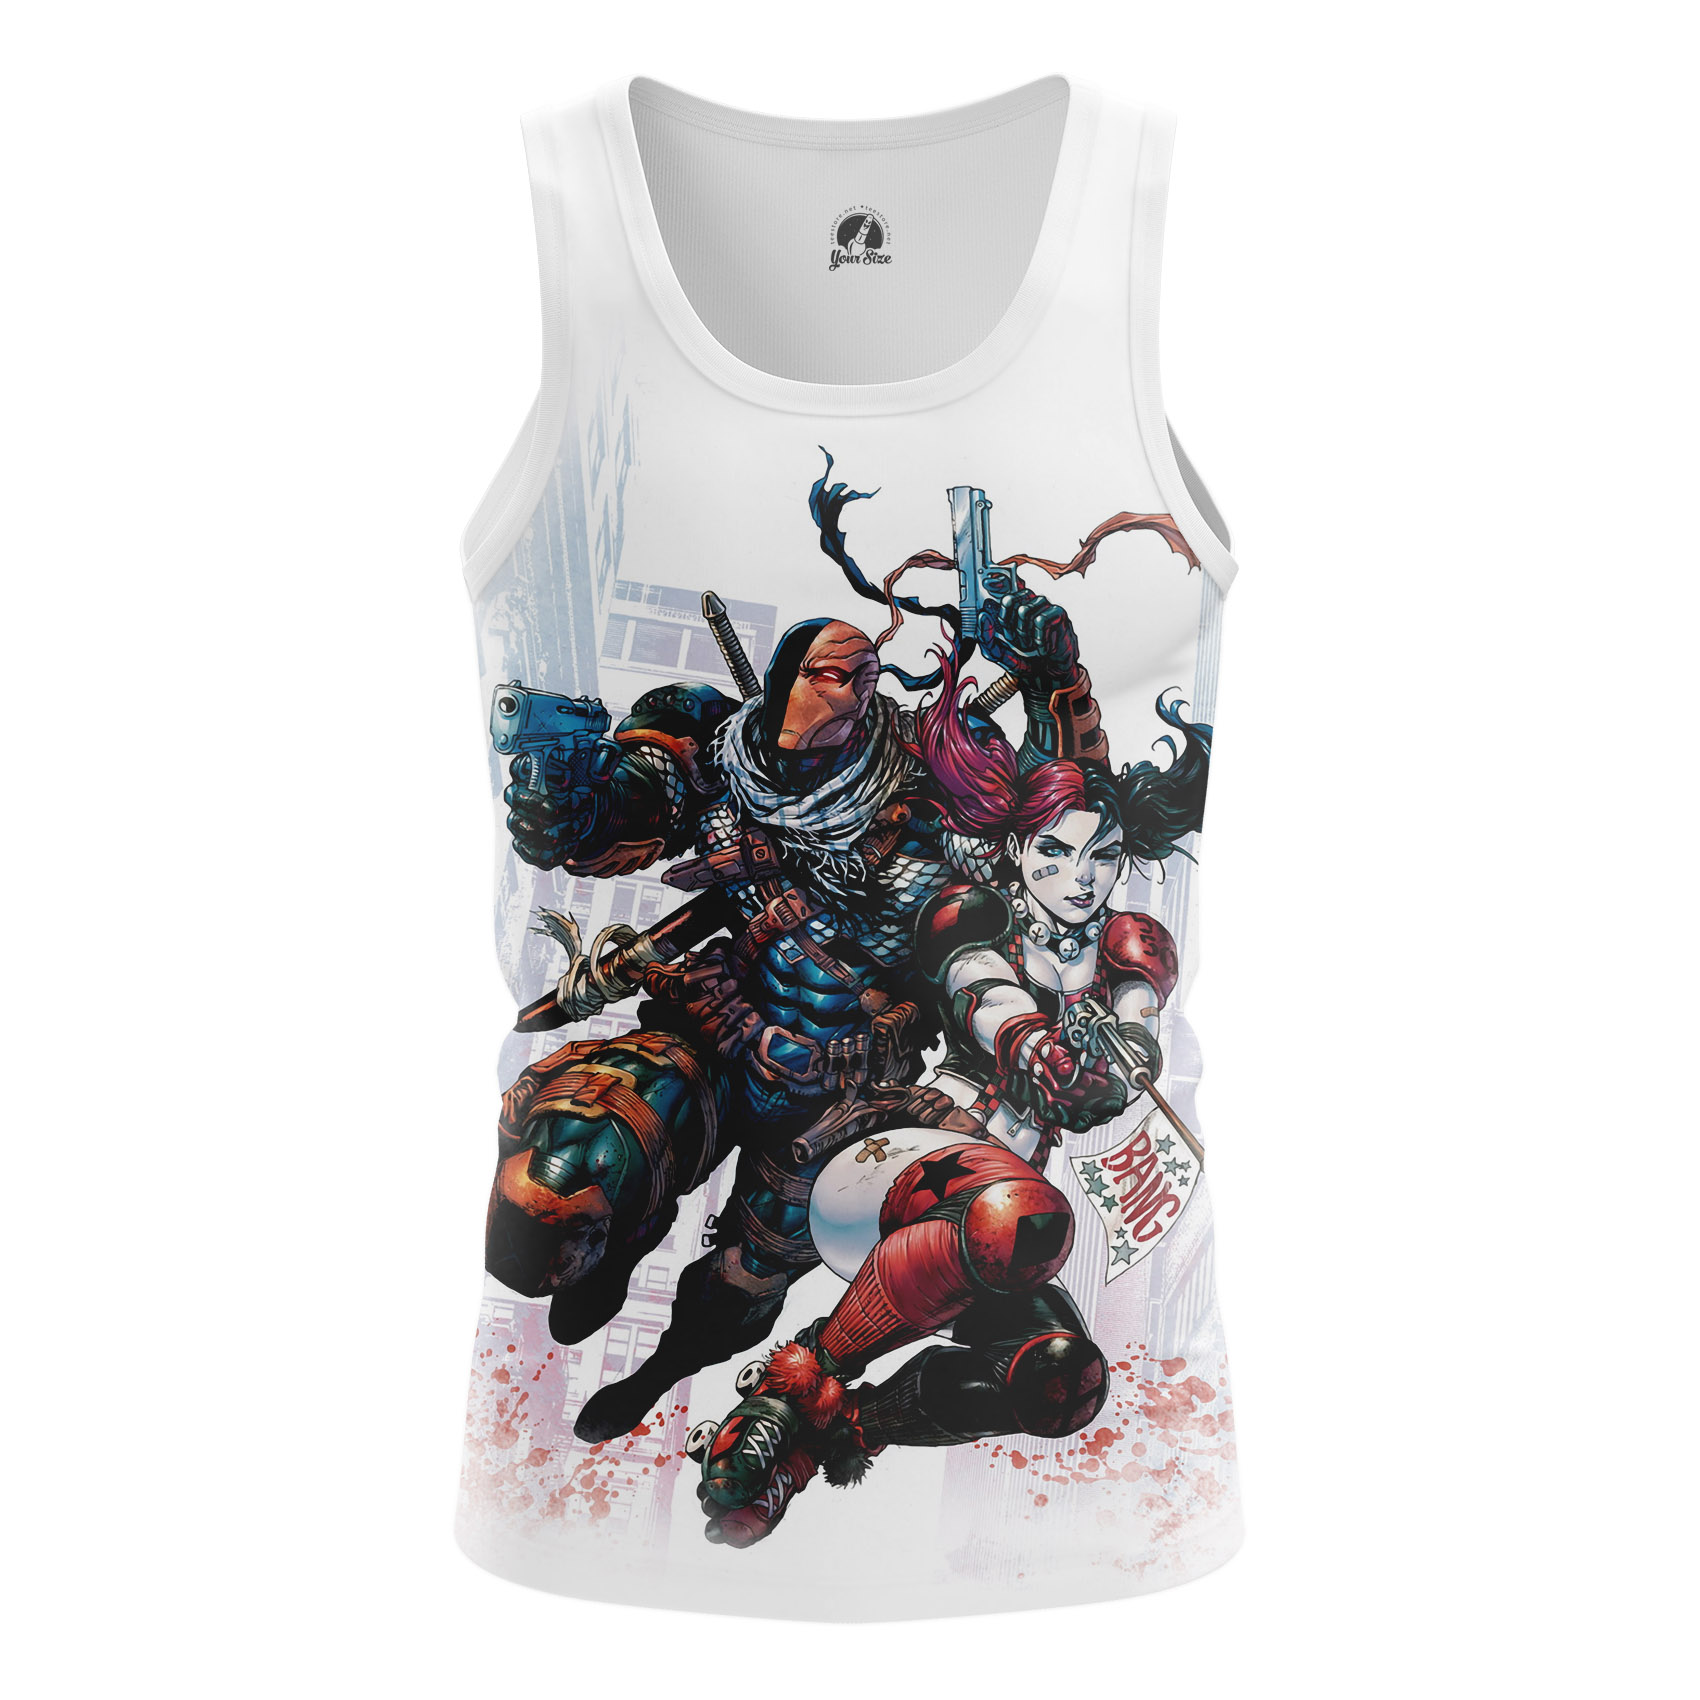 Men’s t-shirt DeathStroke And Harley Comics Idolstore - Merchandise and Collectibles Merchandise, Toys and Collectibles